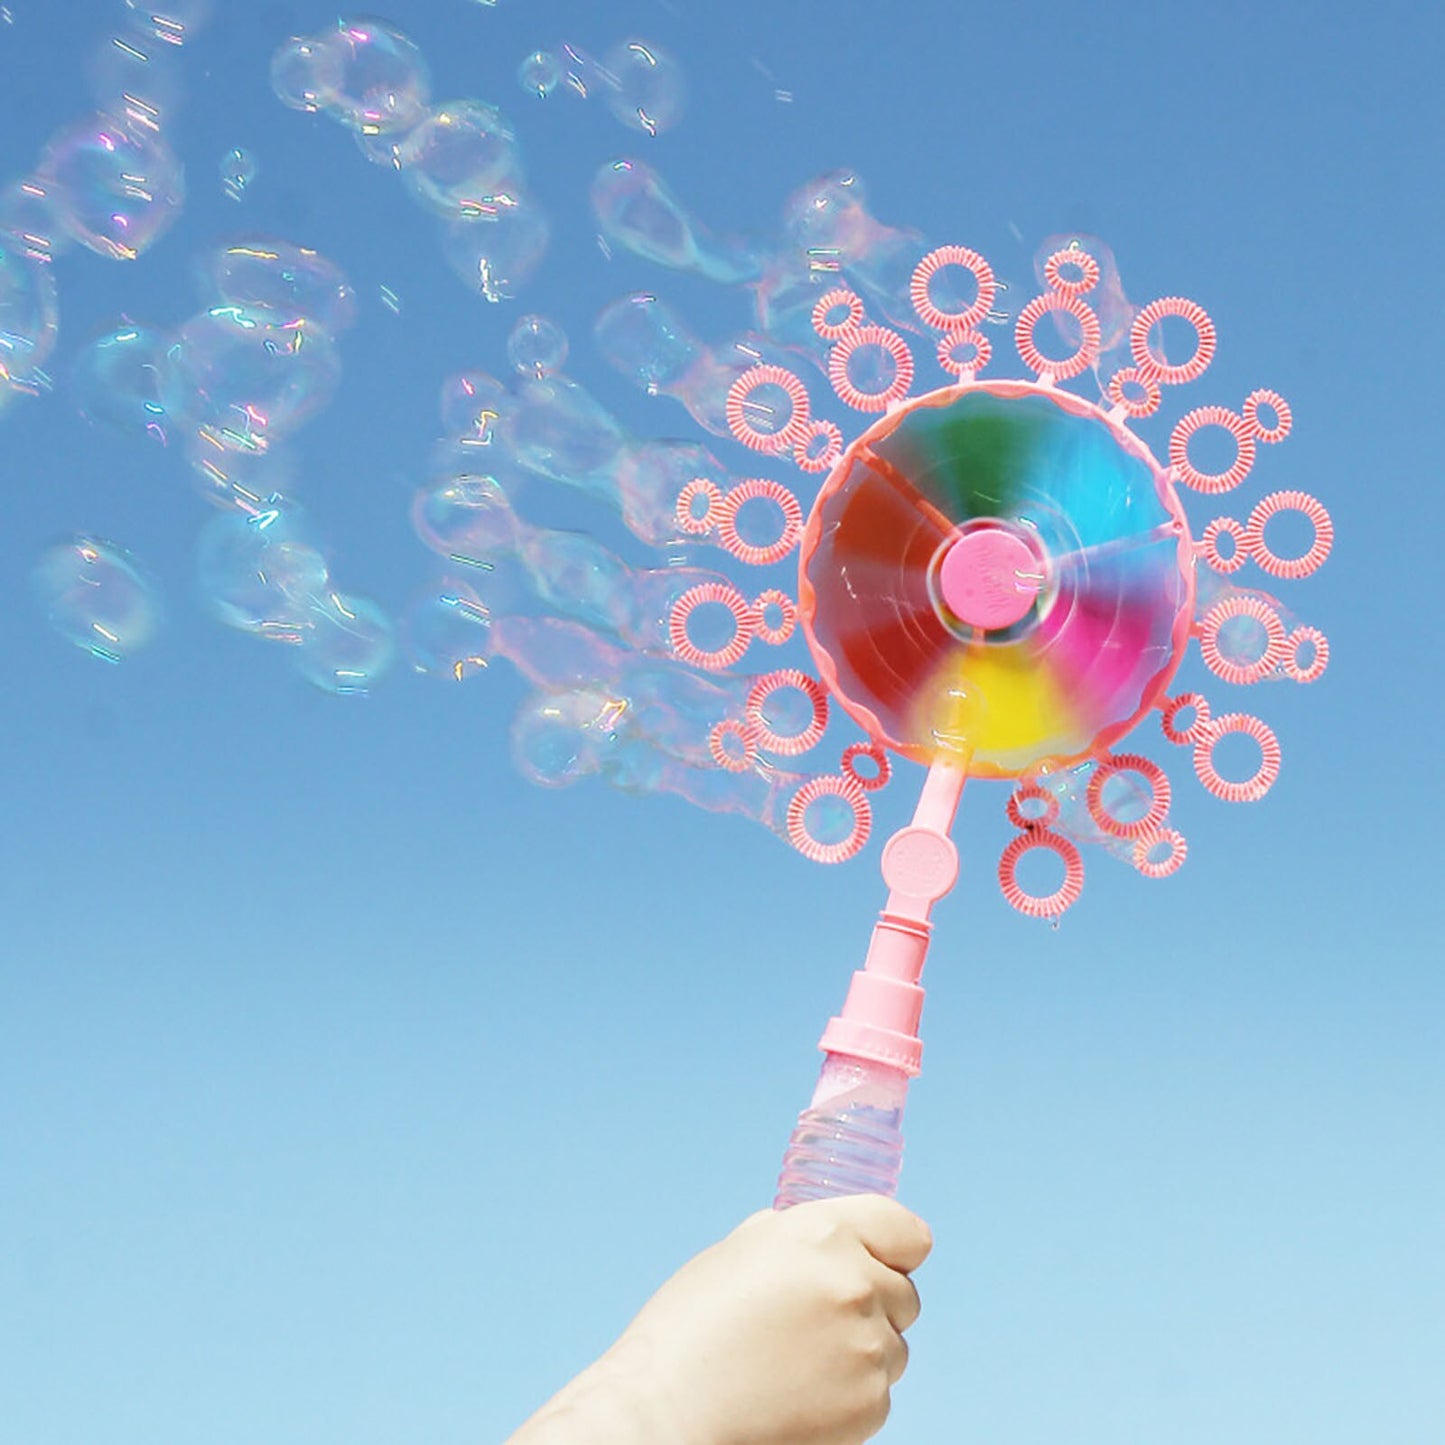 Windmill Bubble Wand, Bubble Blower and Pinwheel Spinner for Kids with Solution in Handle